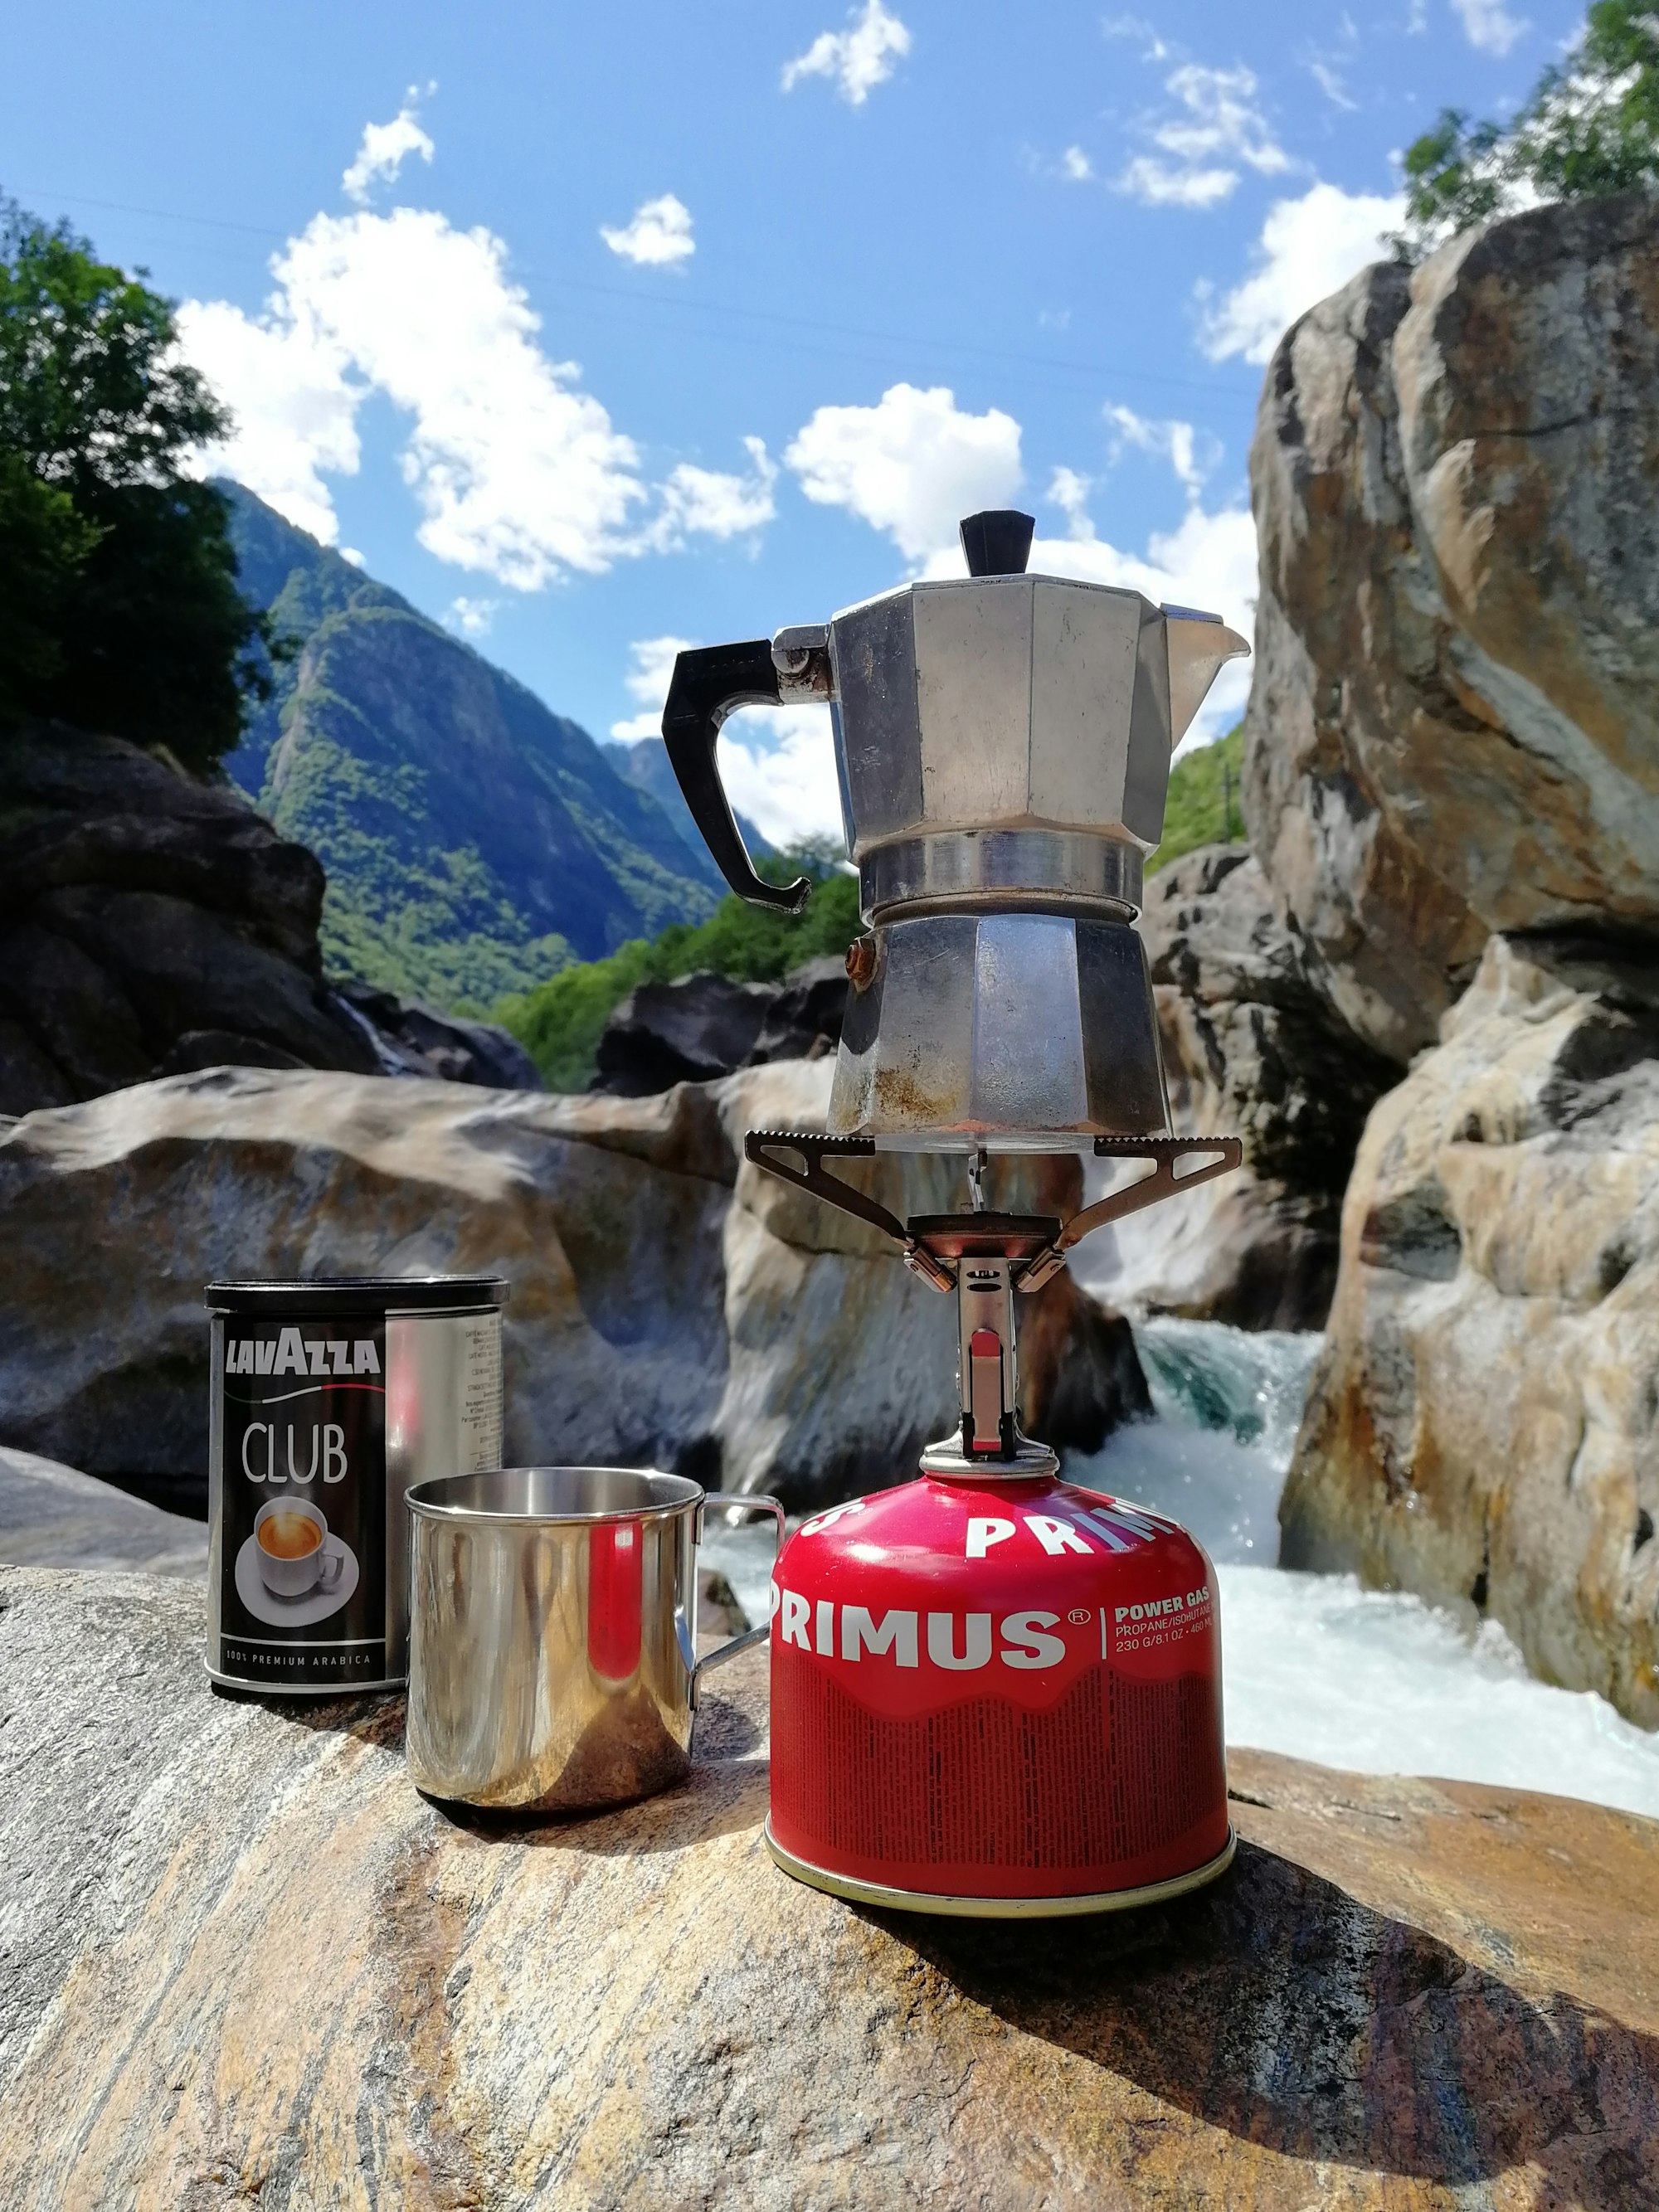 Life is fast-paced. Therefore I am always travelling with my camping cooker. Nothing is more relaxing than having a nice coffee wherever and whenever you want.